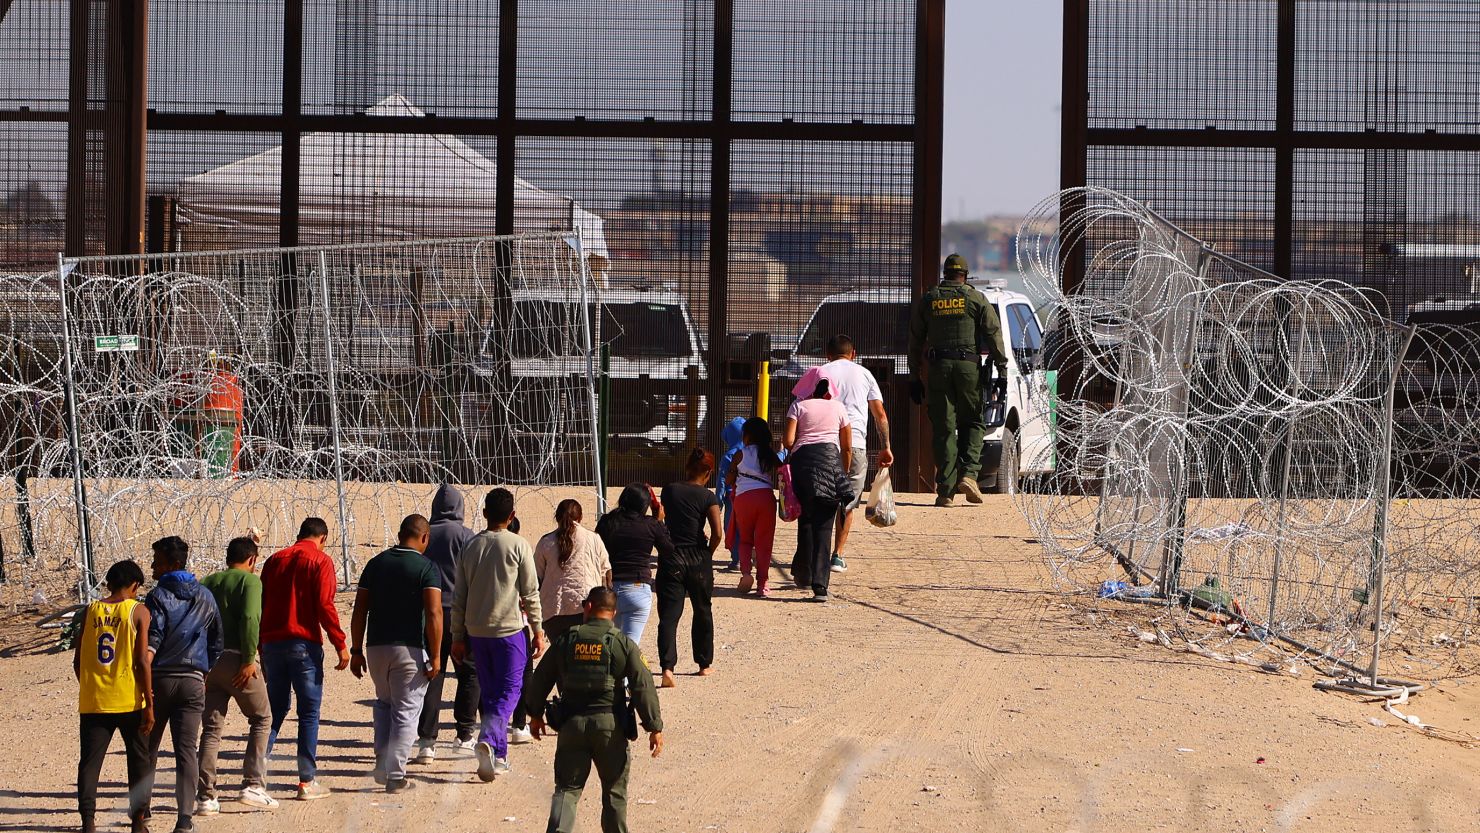 US Border Patrol agents escort migrants, who crossed the border between the United States and Mexico, through a gate in the border wall to be processed for their immigration claims, as seen from Ciudad Juarez, Mexico, in October.